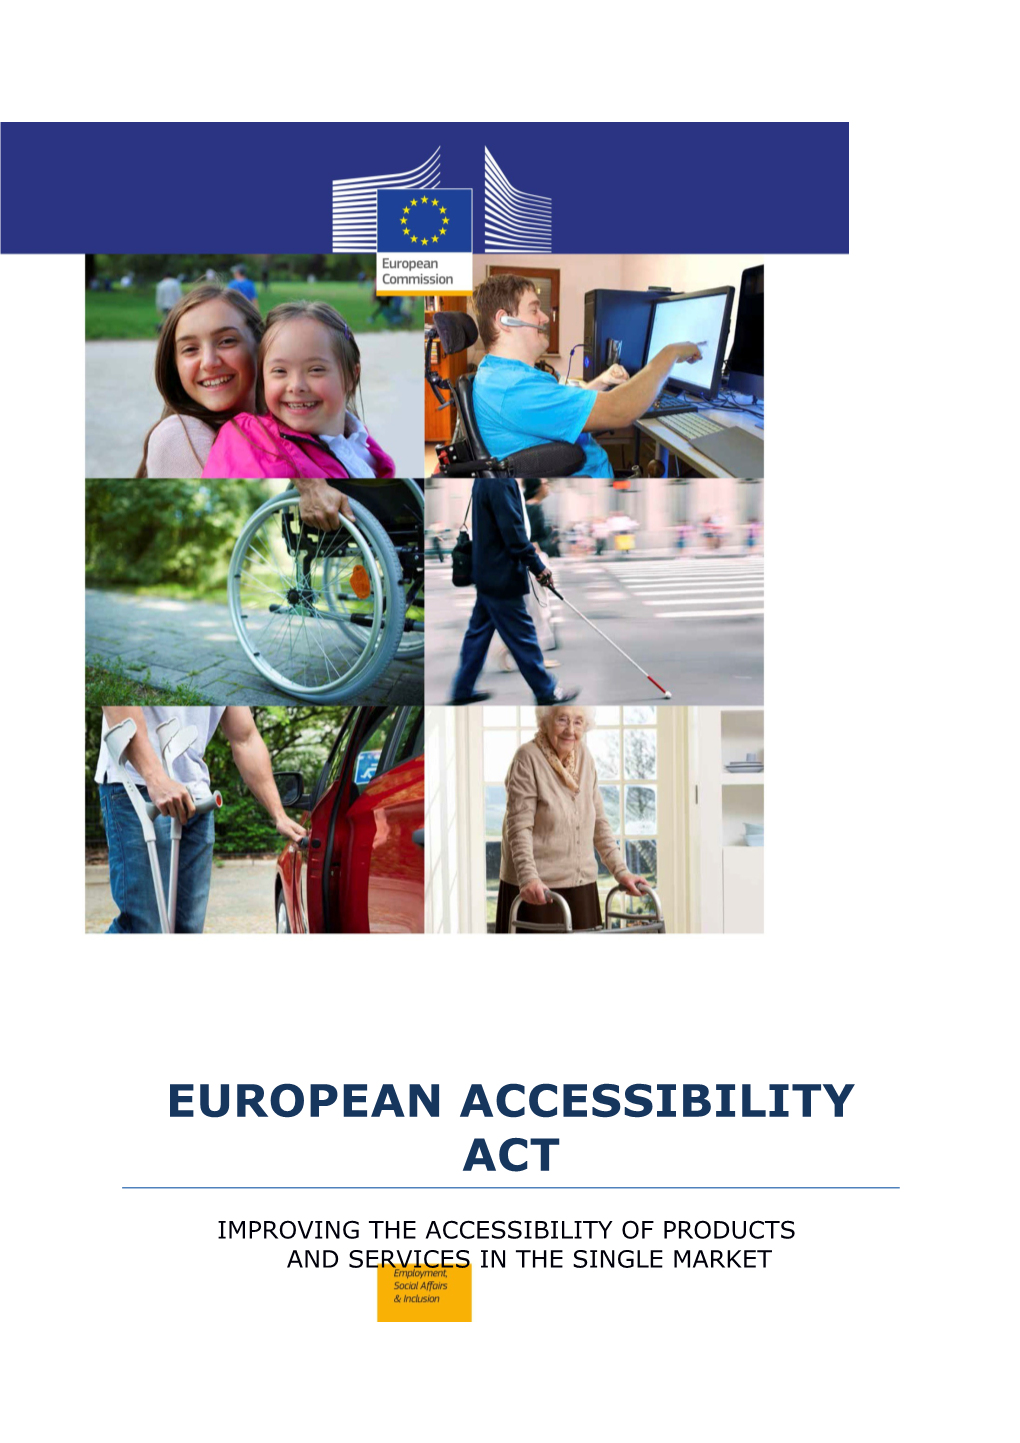 Improving the Accessibility of Products and Services in the Single Market